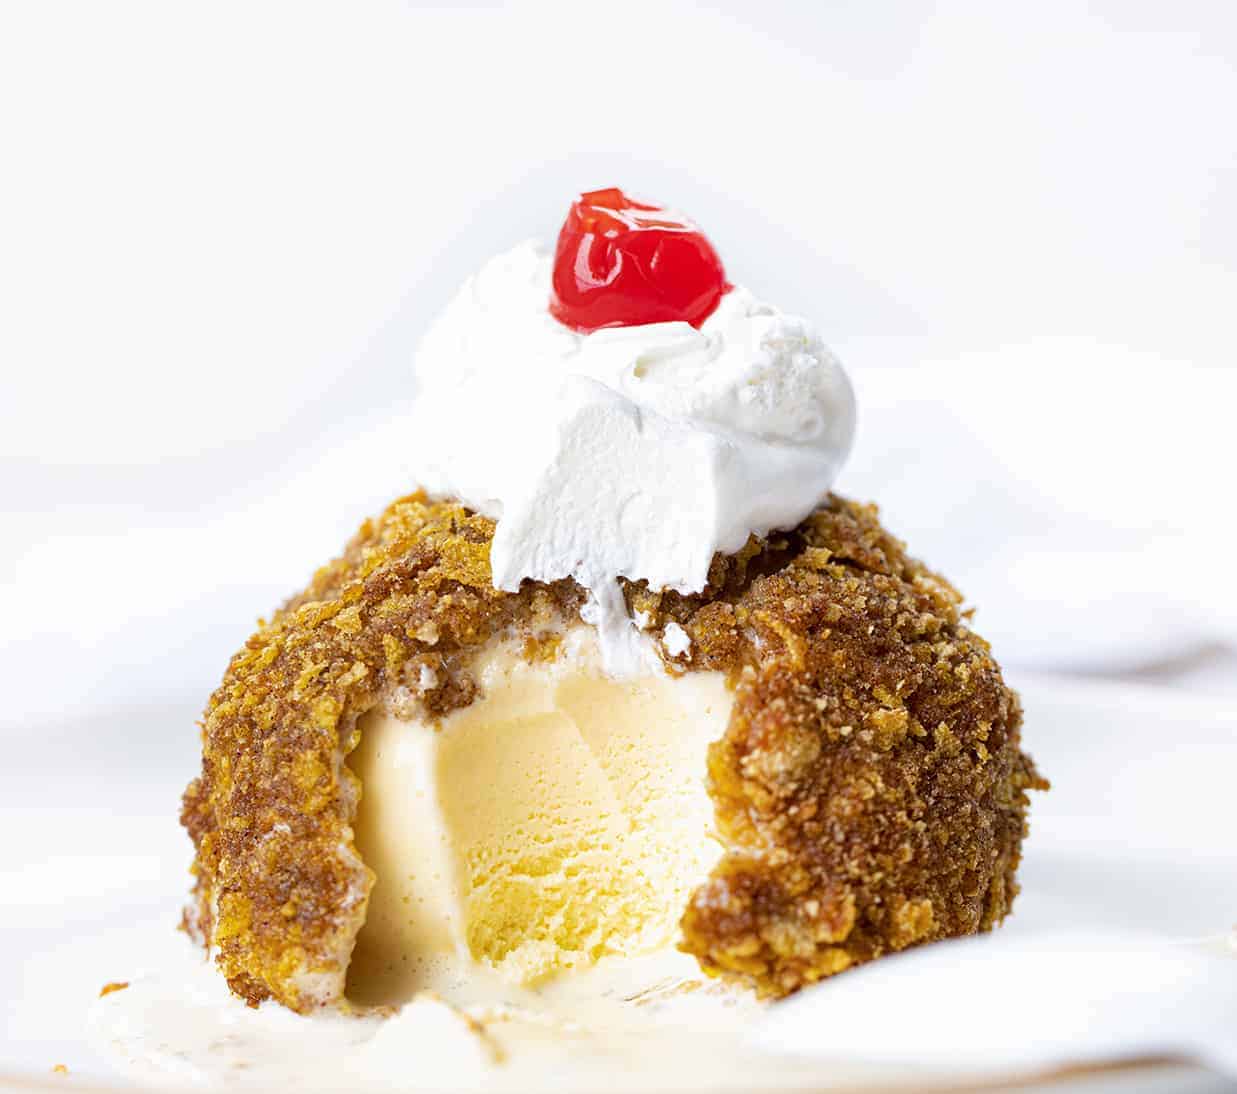 Fried Ice Cream with Bite Take out on a White Plate.